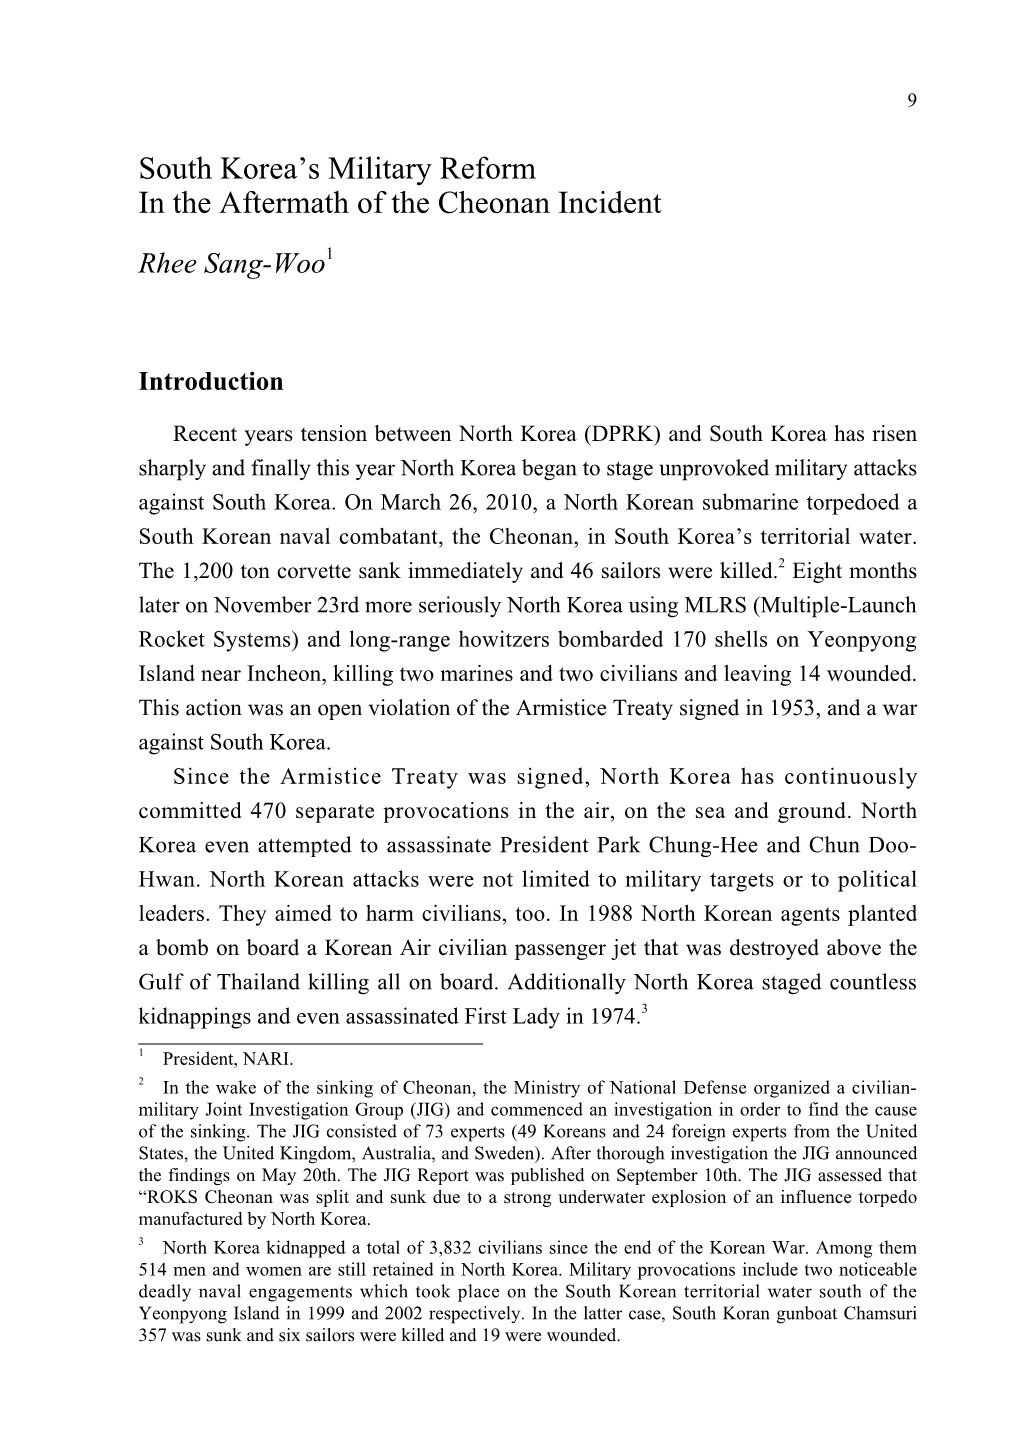 South Korea's Military Reform in the Aftermath of the Cheonan Incident